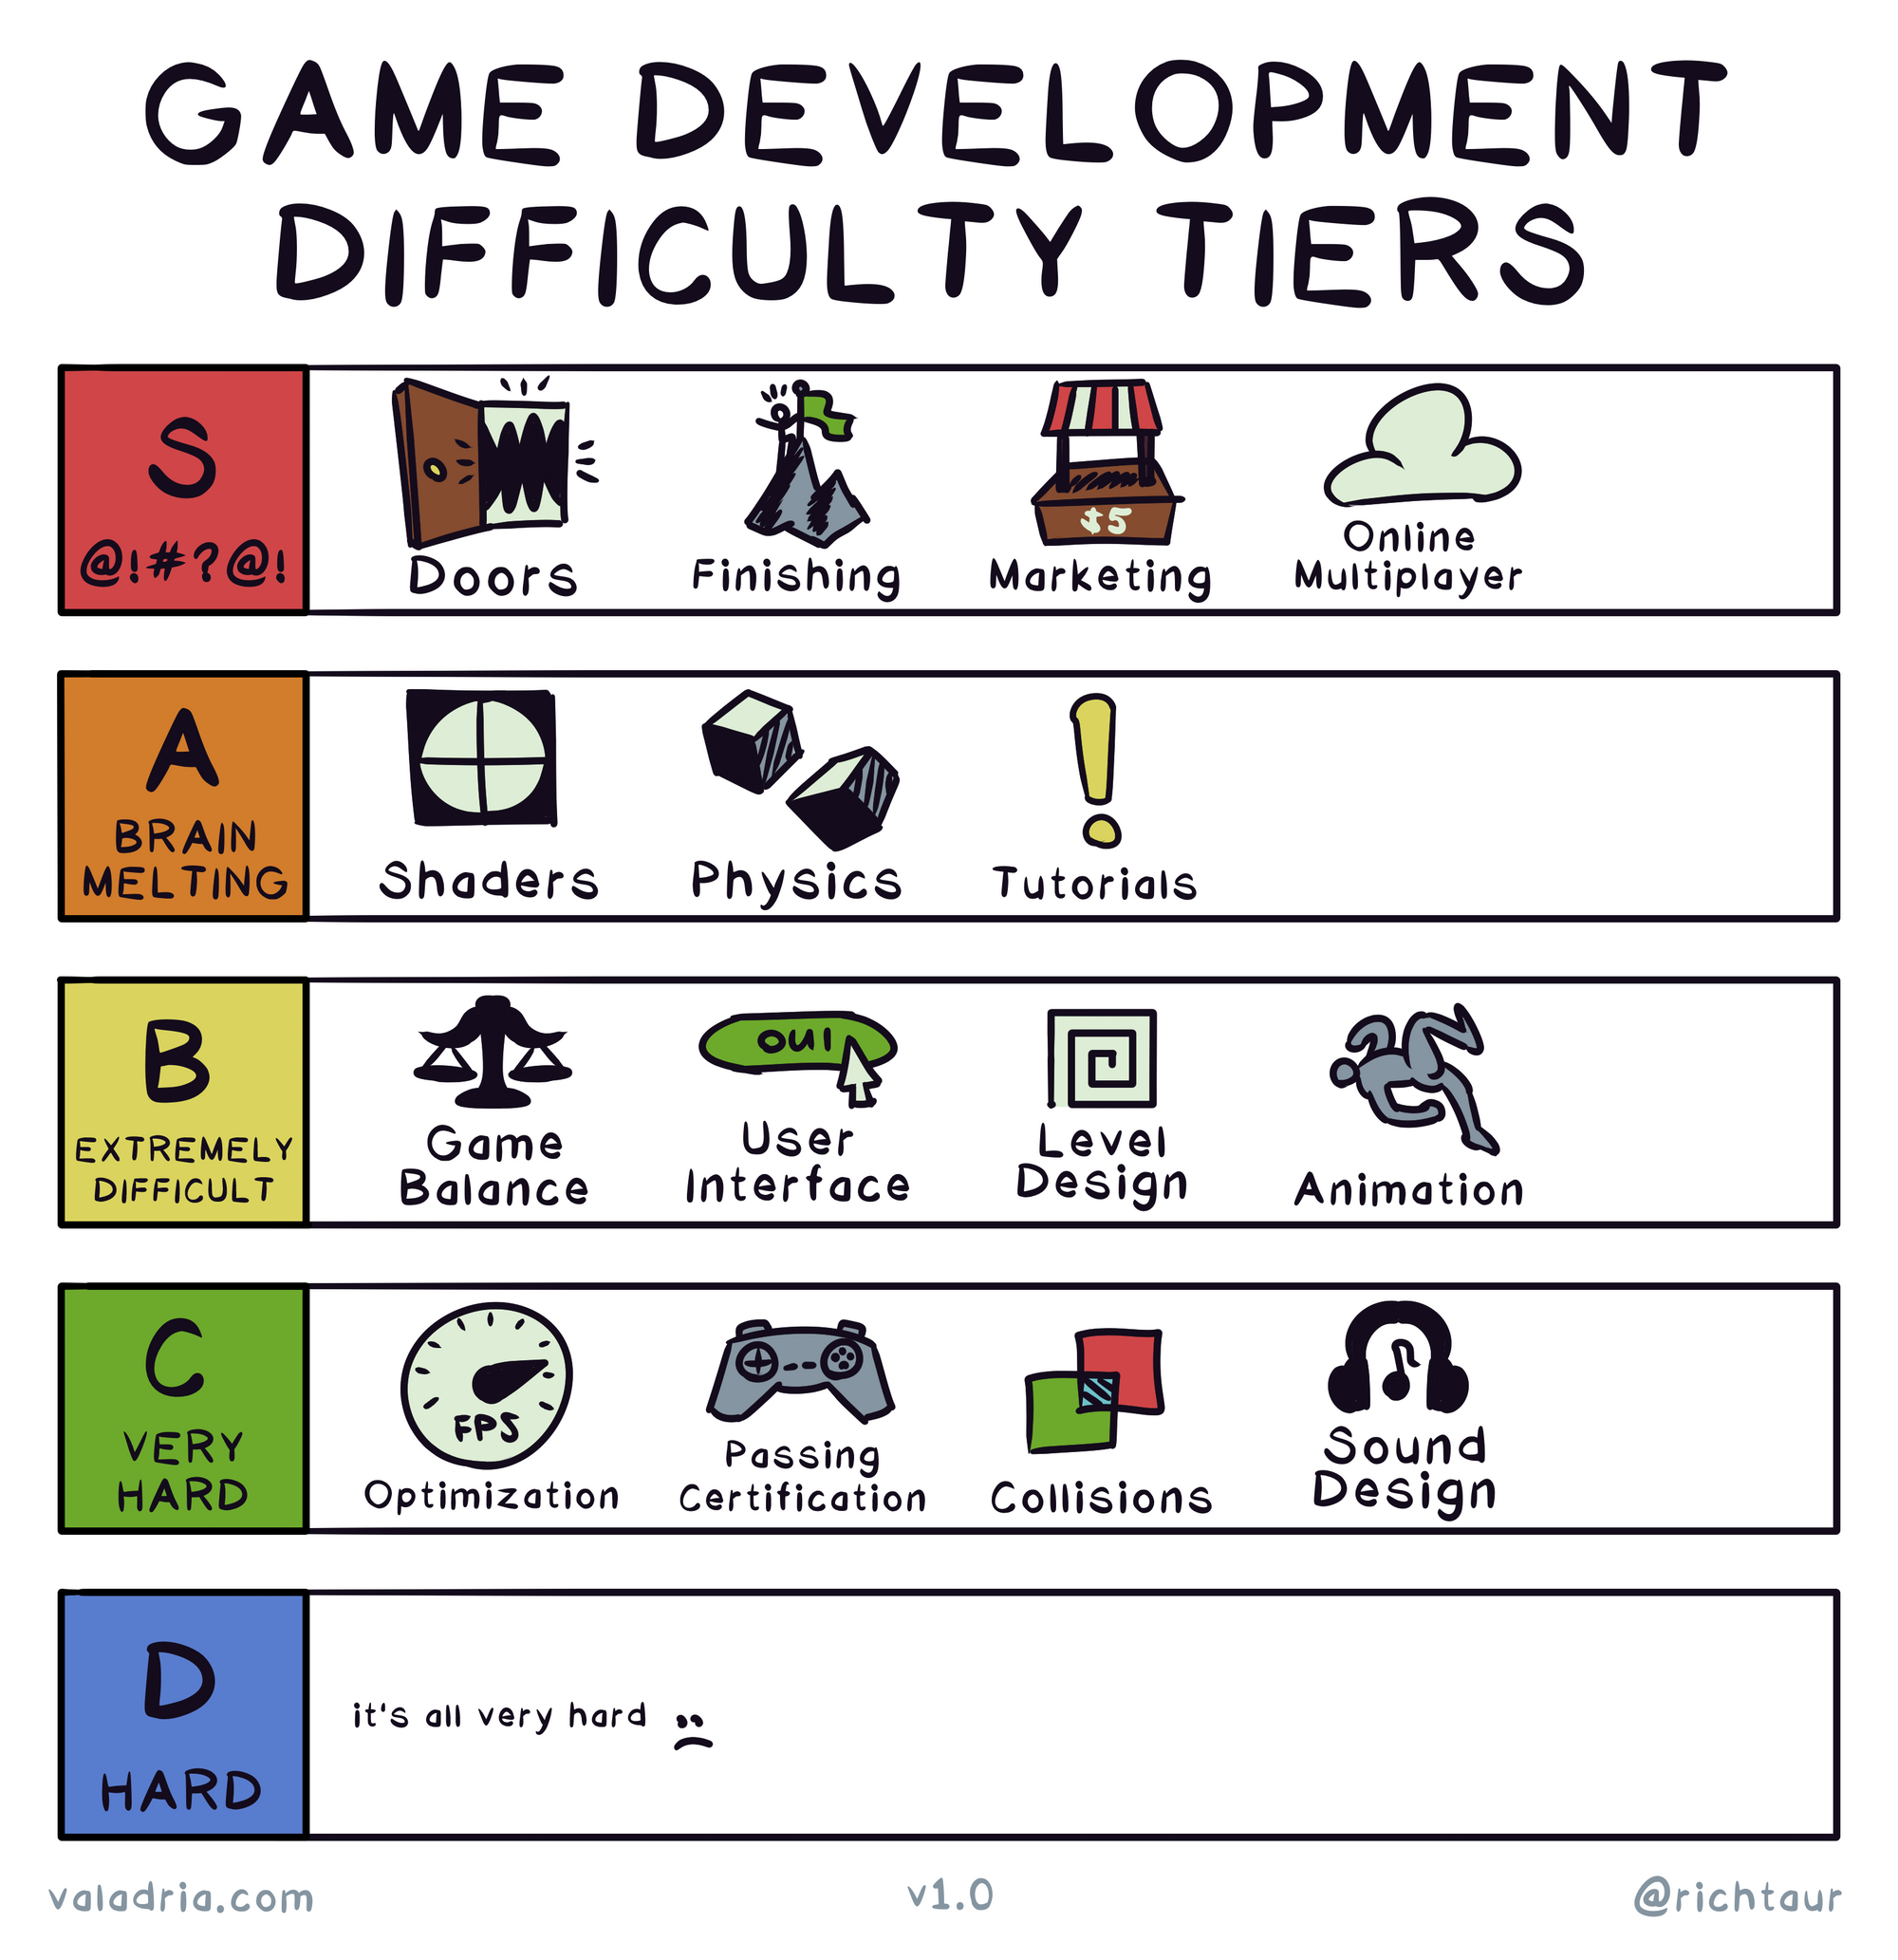 Game Development Difficulty Tiers S: Doors, Finishing, Marketing, Online Multiplayer A (brain melting): Shaders, Physics, Tutorials B (extremely difficult): Game Balance, User Interface, Level Design, Animation C (very hard): Optimization, Passing Certification, Collisions, Sound Design D (hard): It's all very hard :( v1.0 don't kill me